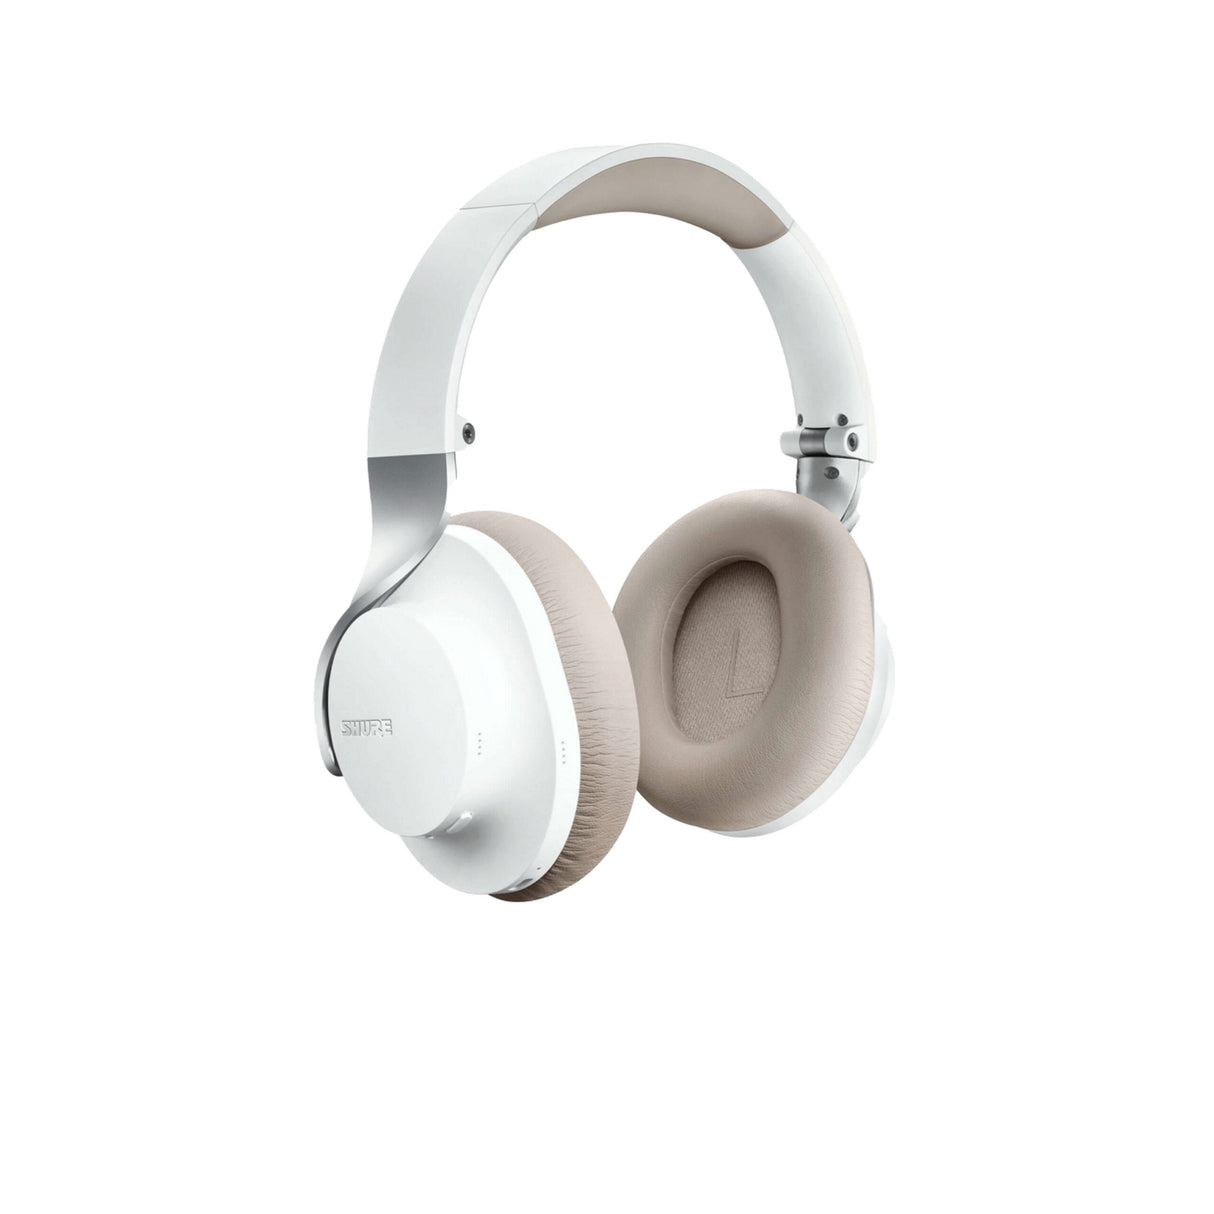 Shure AONIC 40 Wireless Noise Cancelling Headphones, White